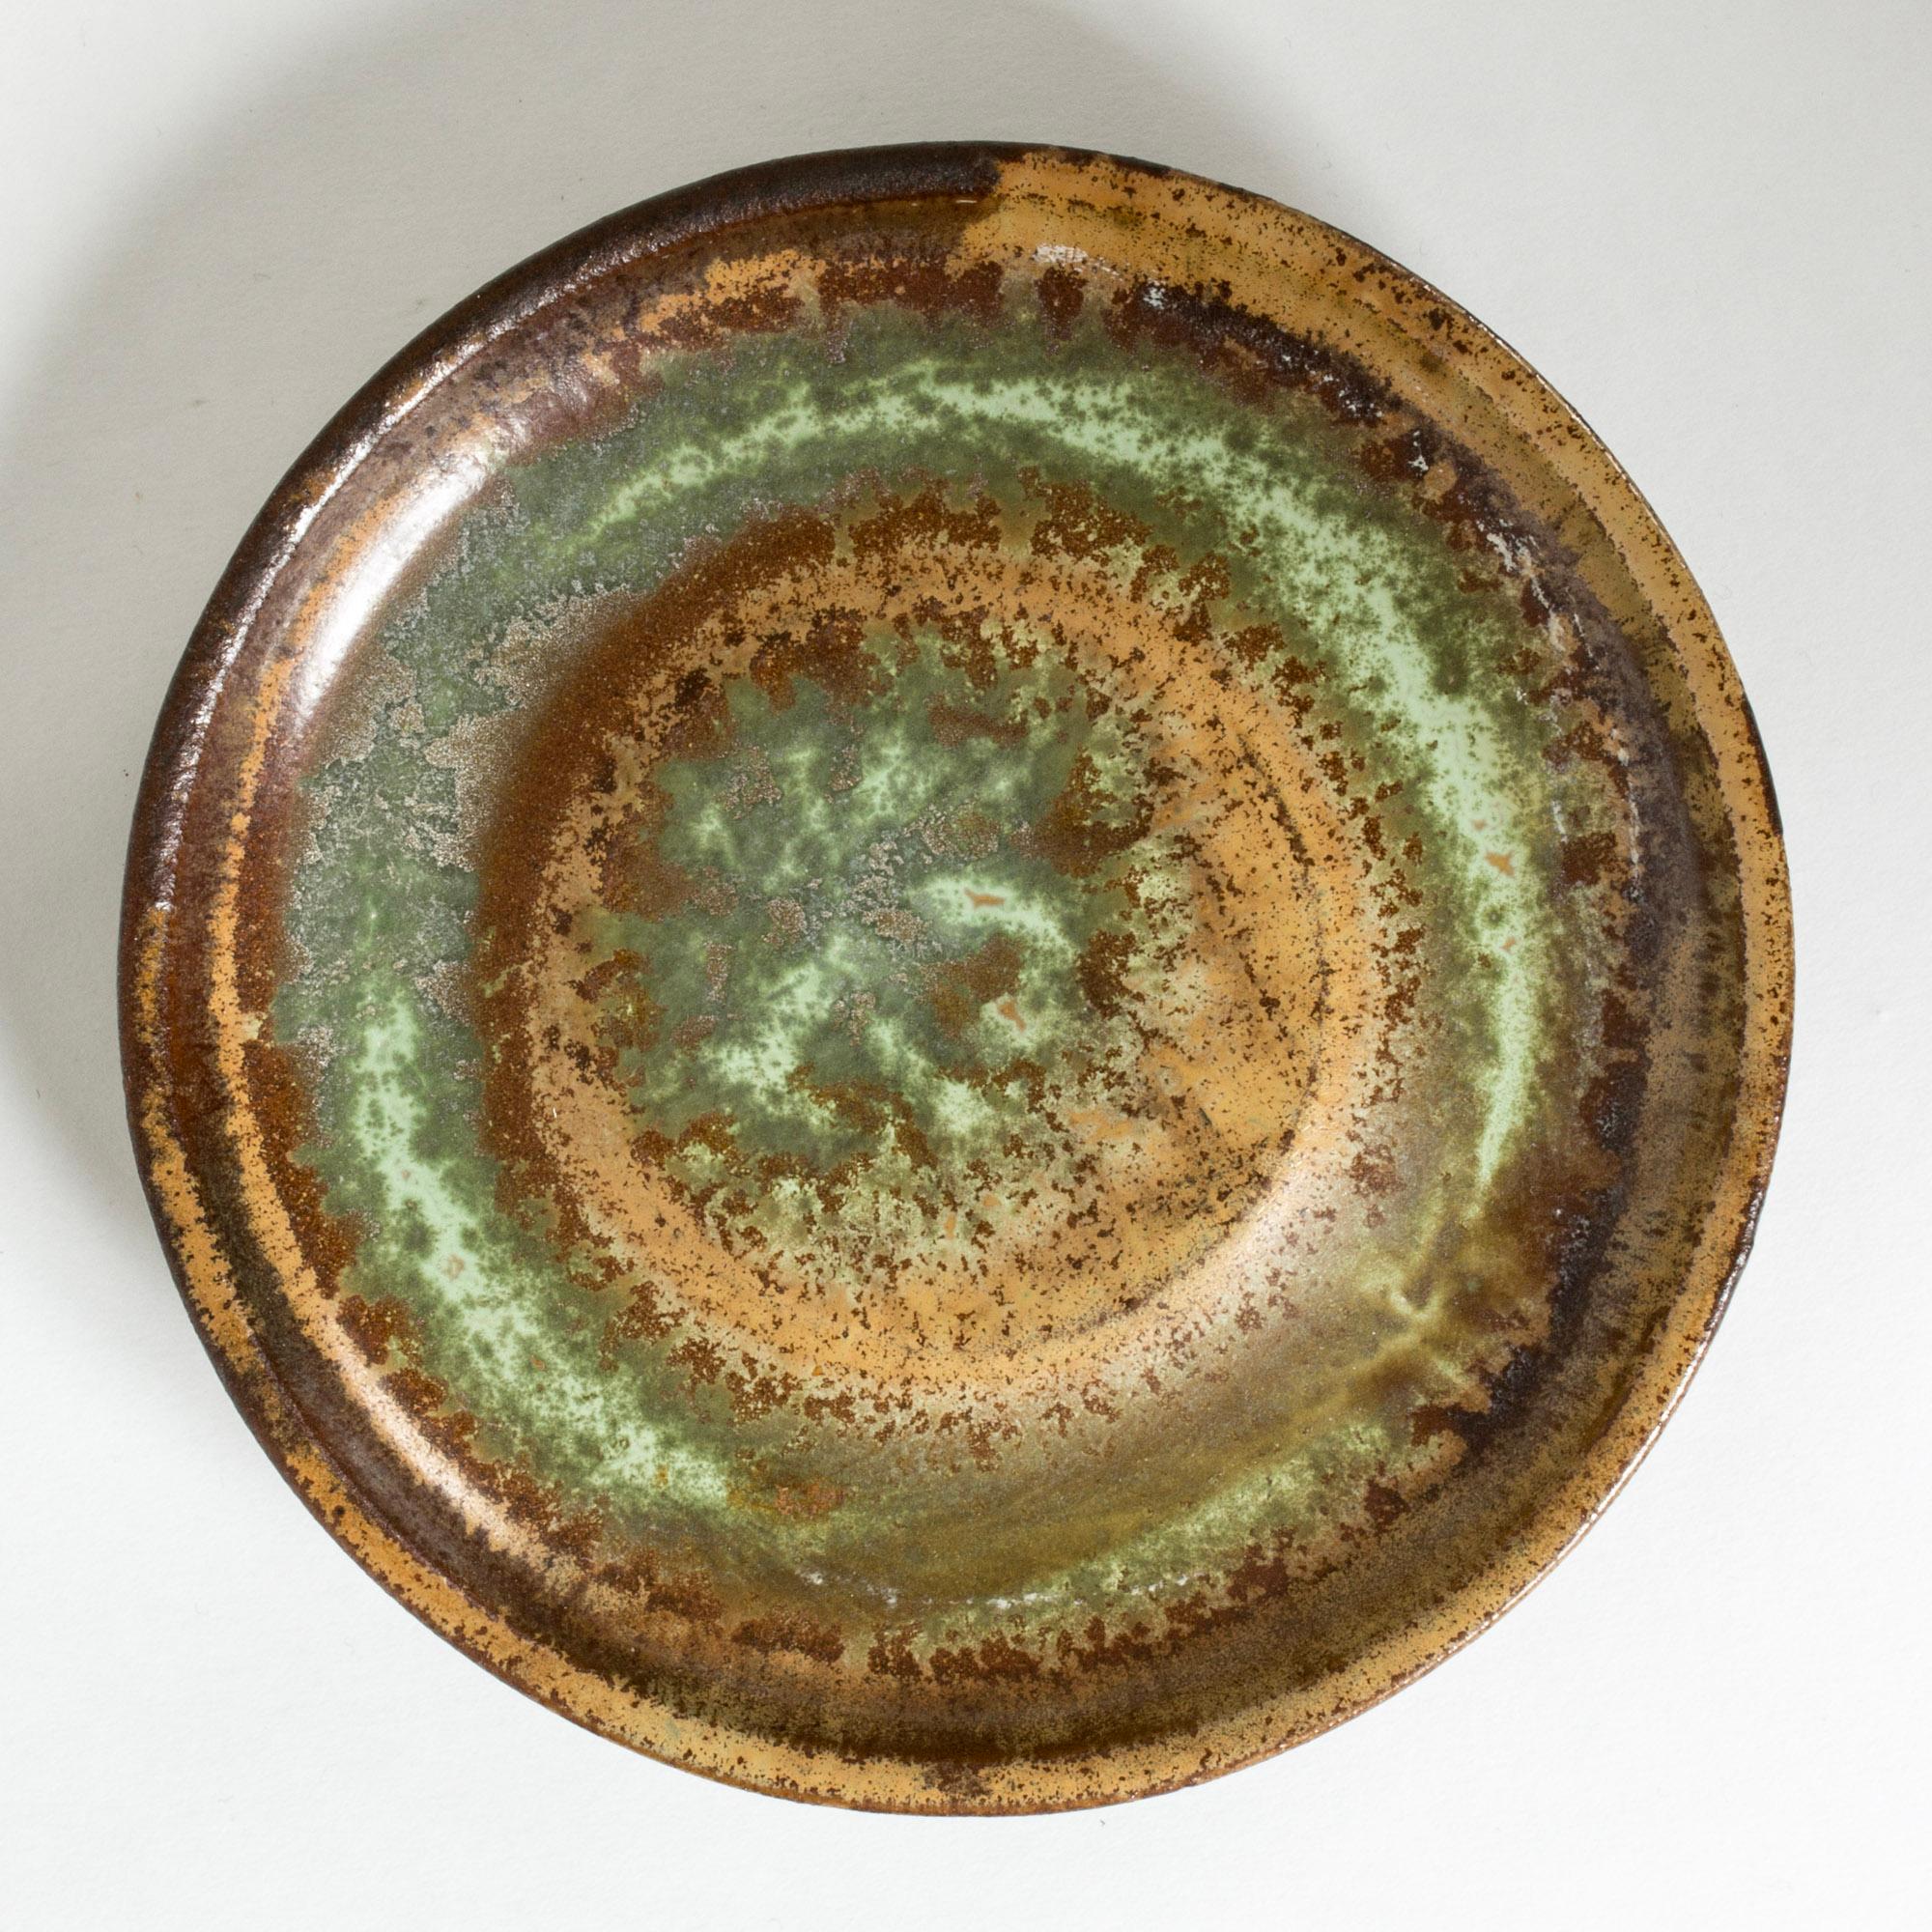 “Farsta” bowl or platter, made from stoneware in a smooth, thick form. Striking glaze in nuances of reddish brown, ochre and green.

“Farsta” stoneware is recognized as being the best and most exclusive that has come out of Swedish arts and crafts.